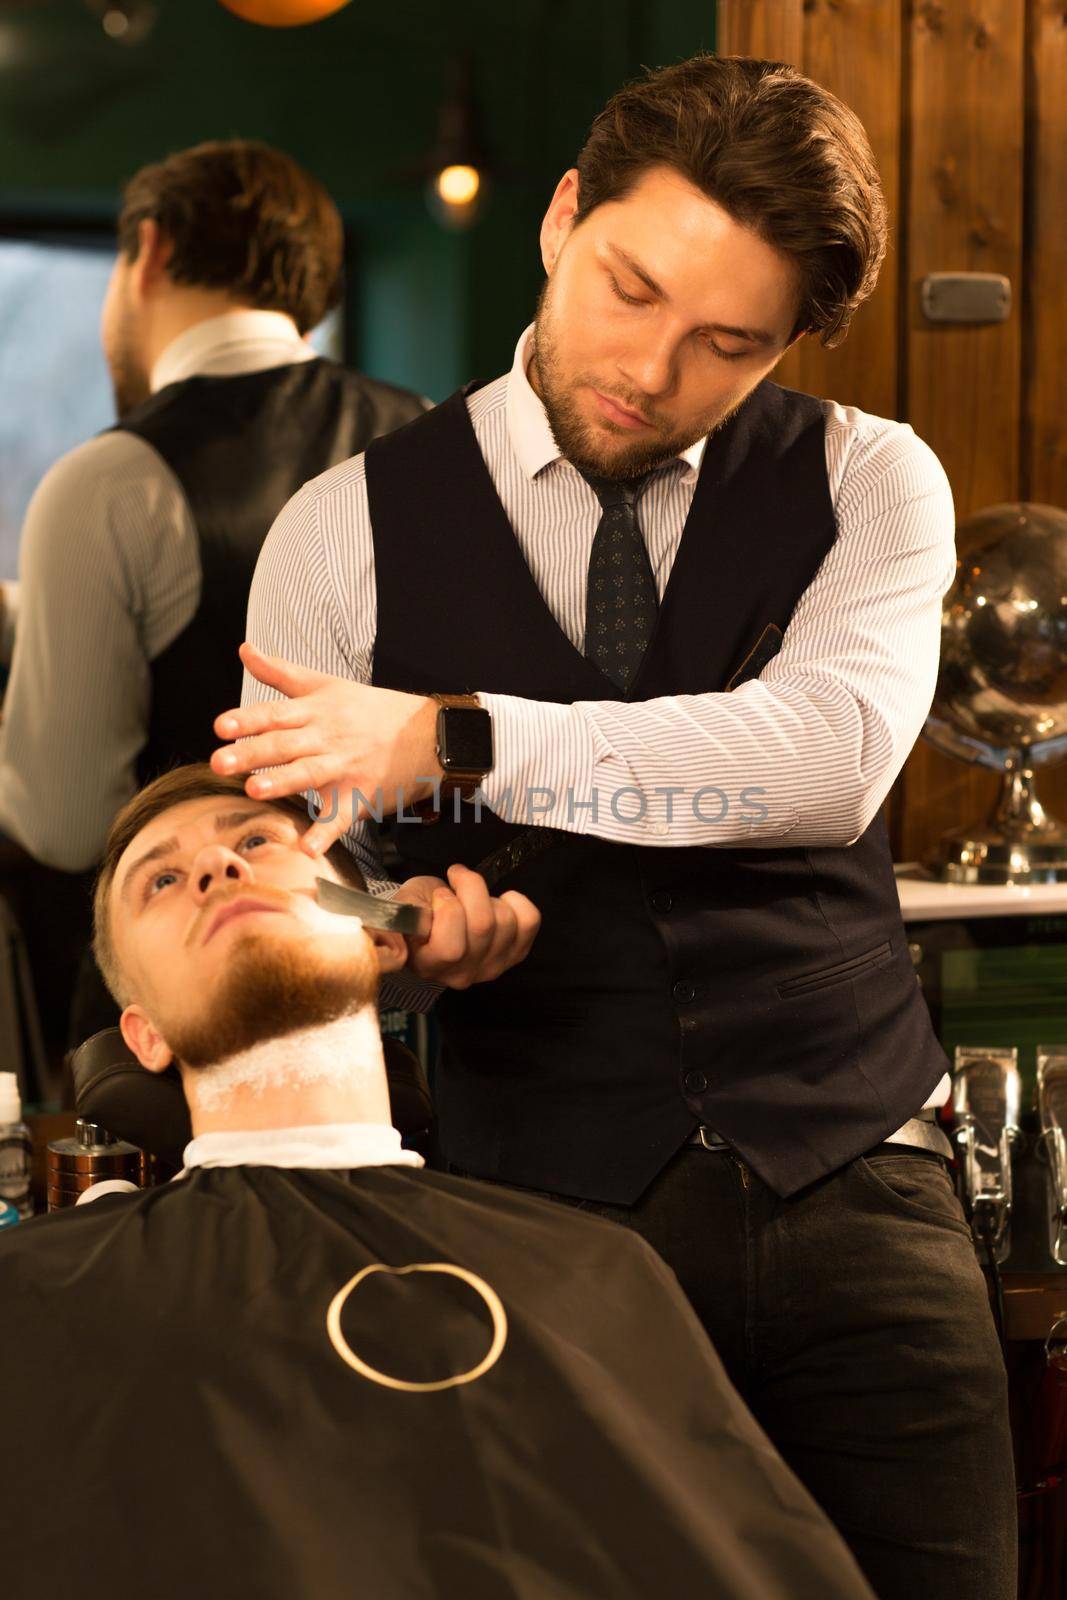 Vertical shot of a handsome professional barber working shaving his client at the barbershop occupation razor equipment barbering job lifestyle hipster traditional hairdresser stylist.